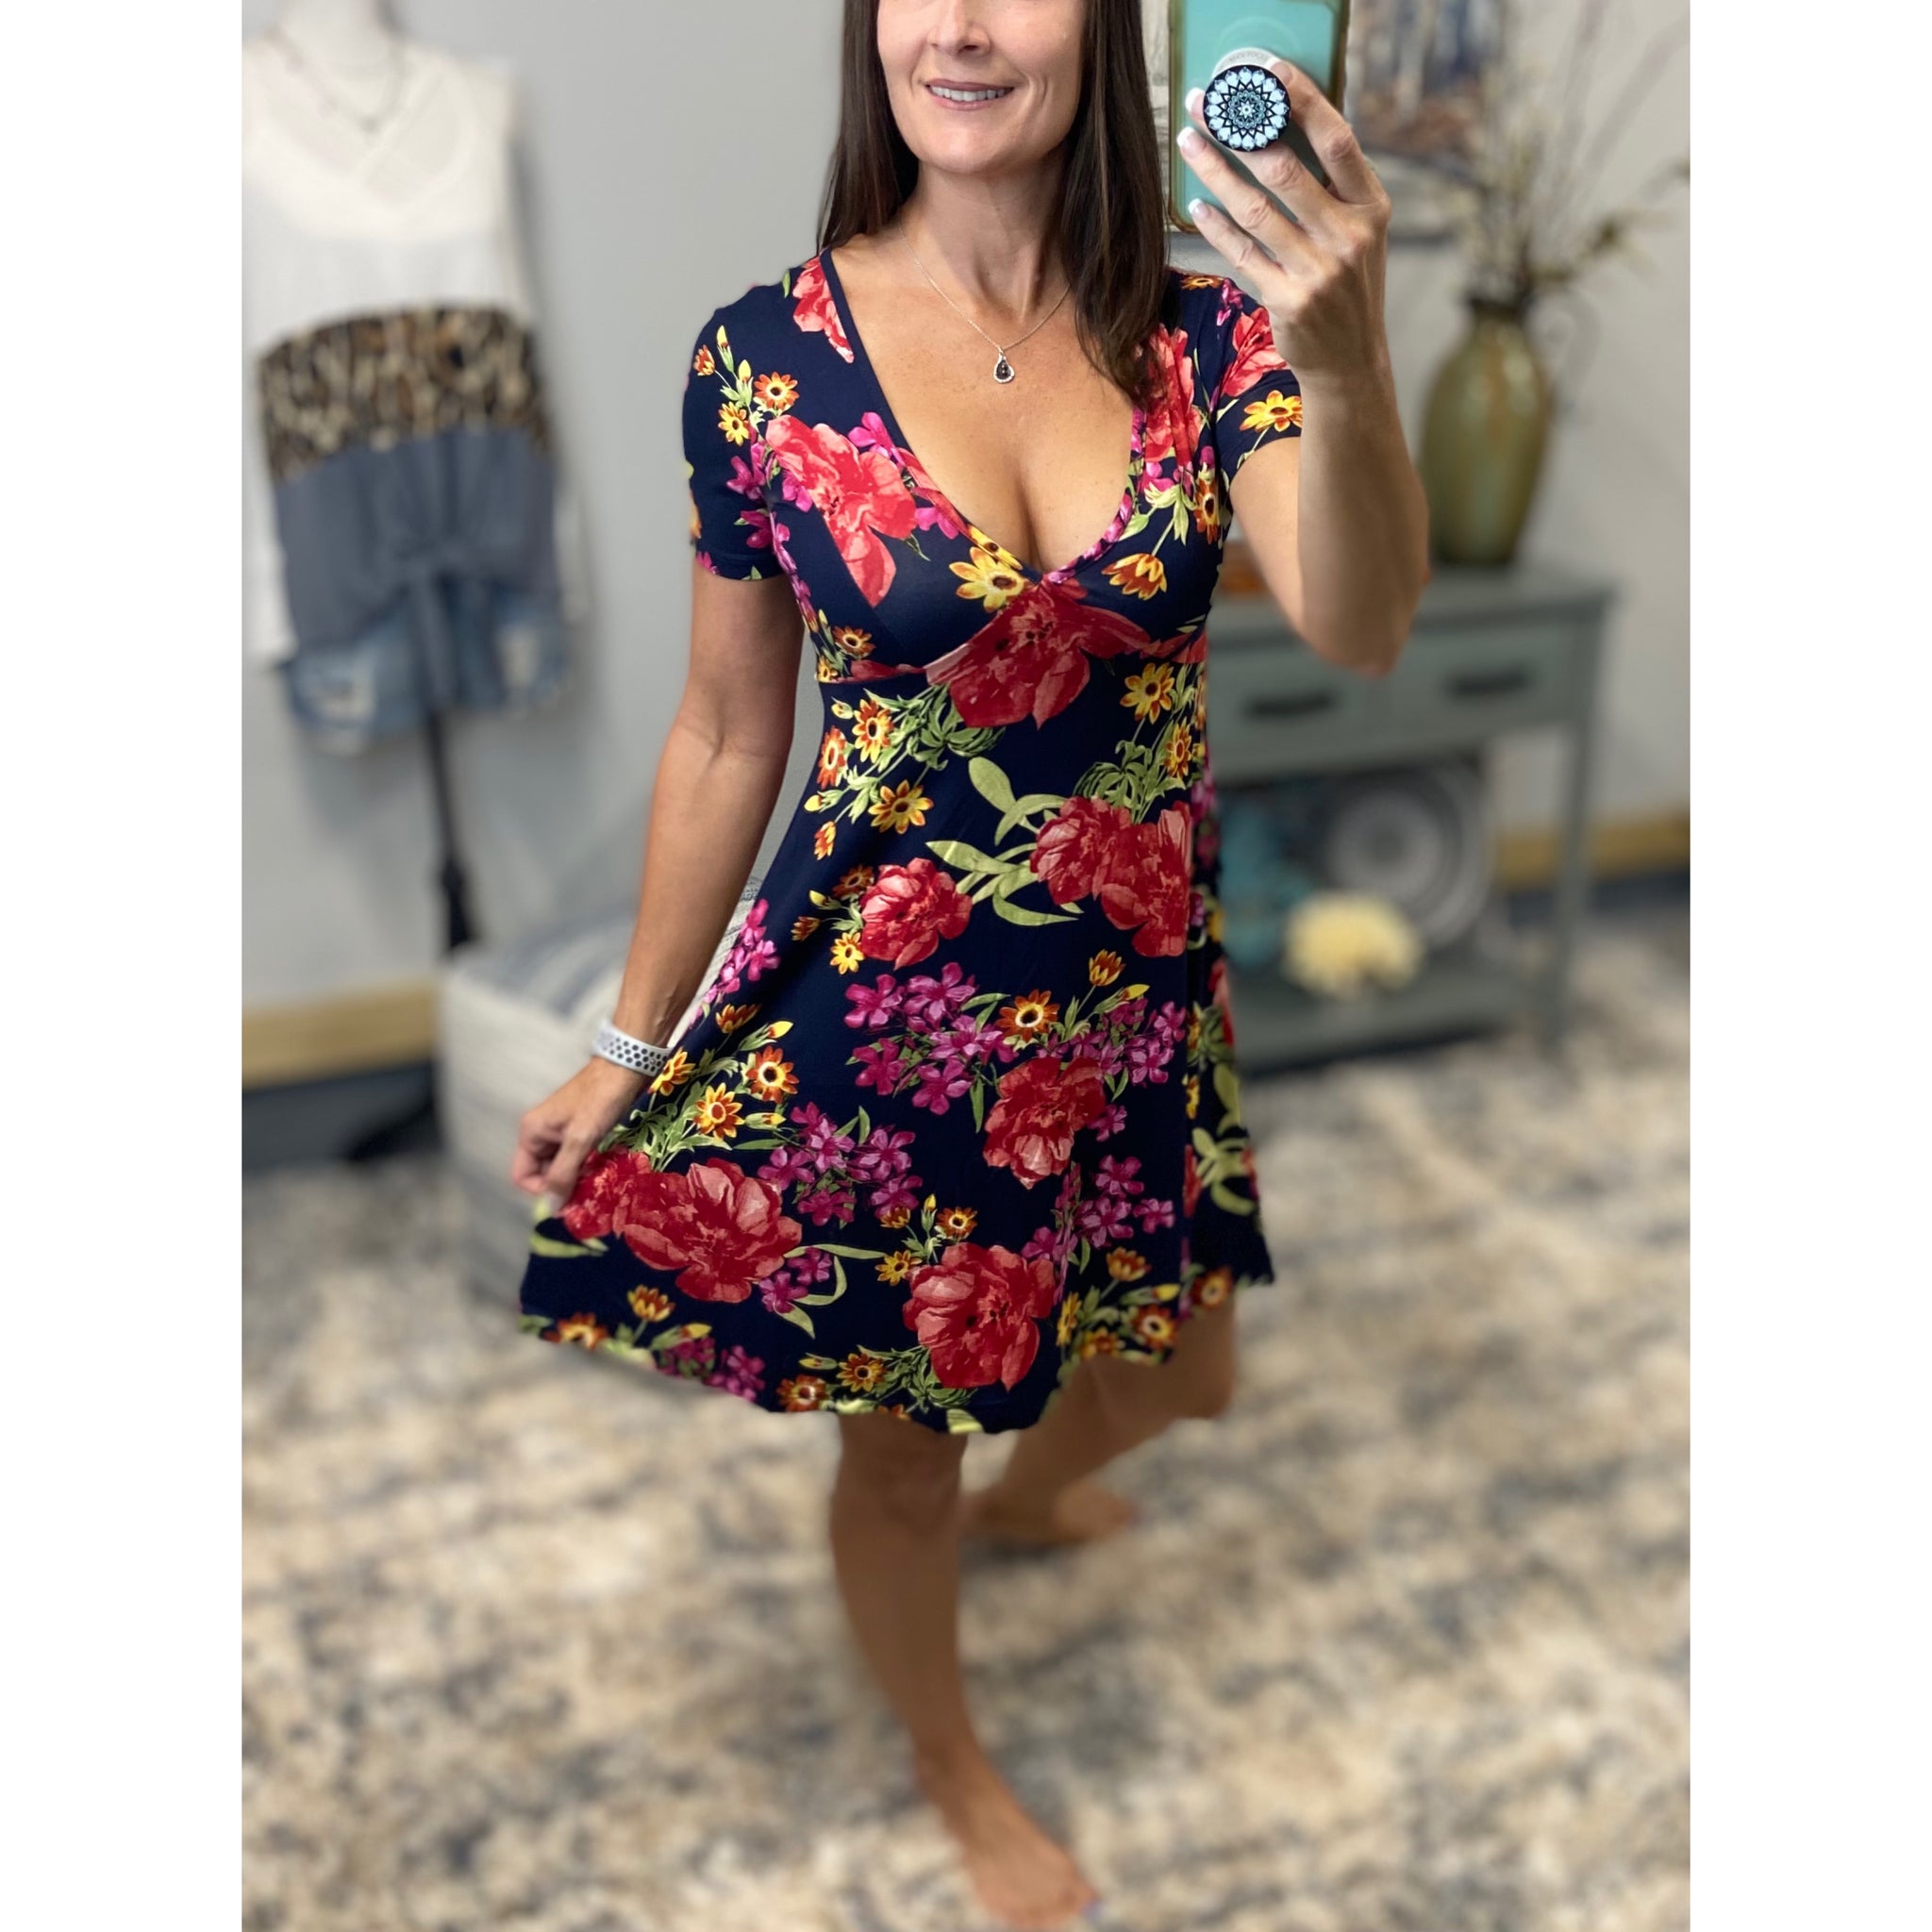 “The Floral Dance” V-Neck Cleavage Fit Flare Country Floral Mini Tee Shirt Dress Navy S/M/L